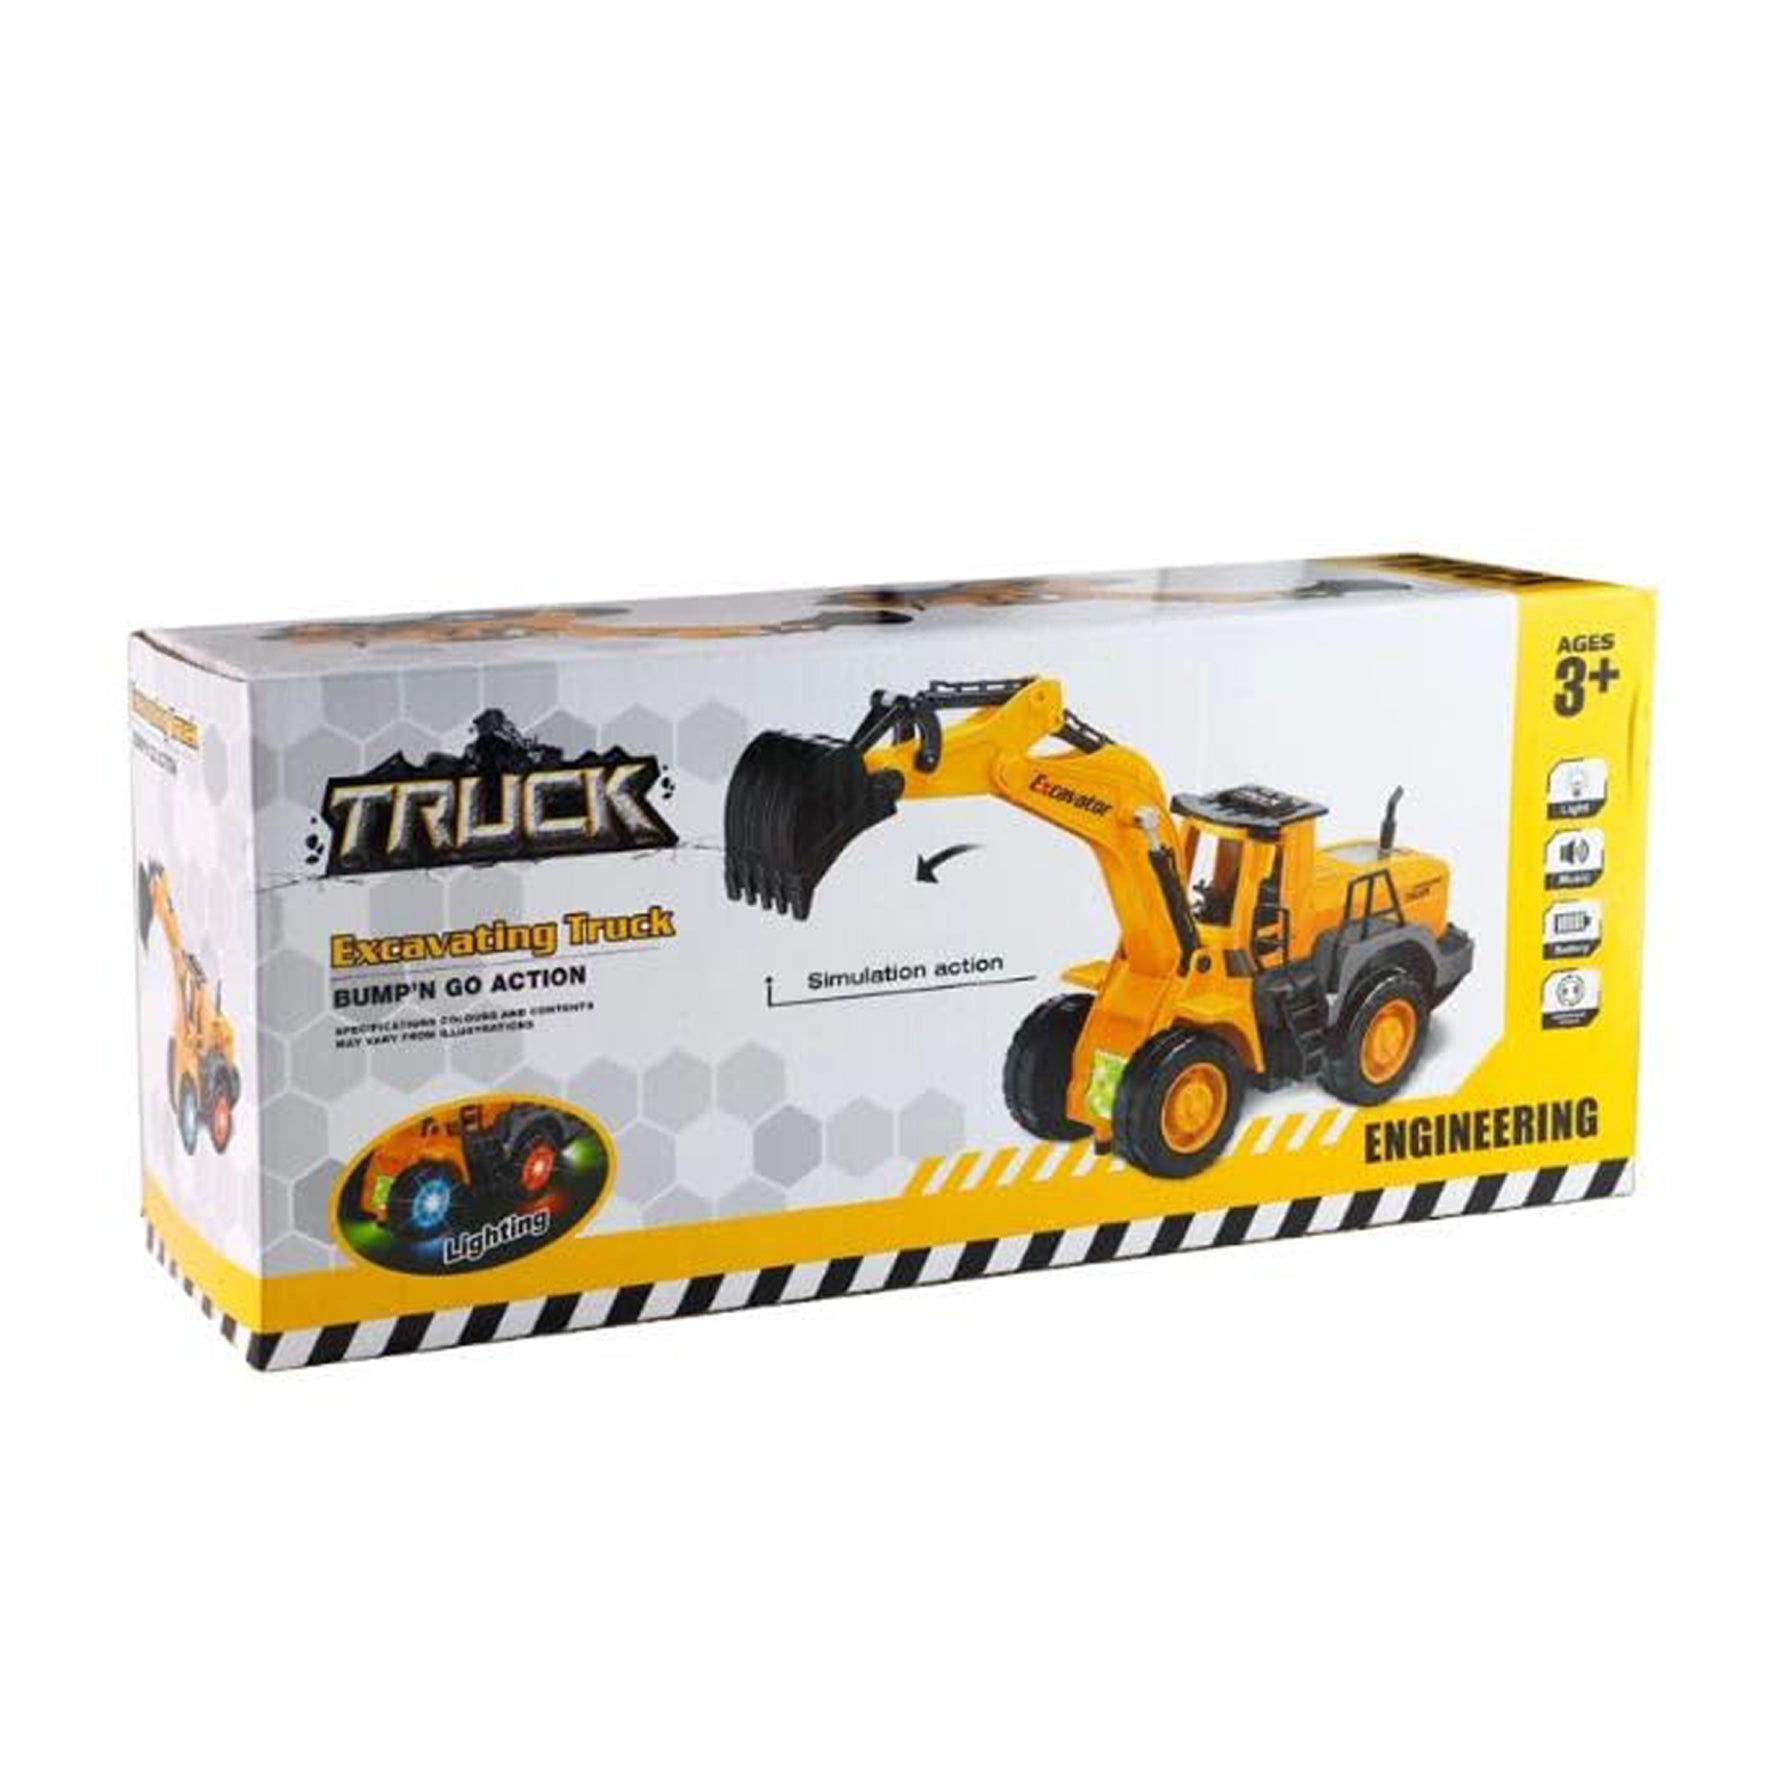 Highland Battery Operated JCB Style Construction Truck with Real Functions Bump and Go